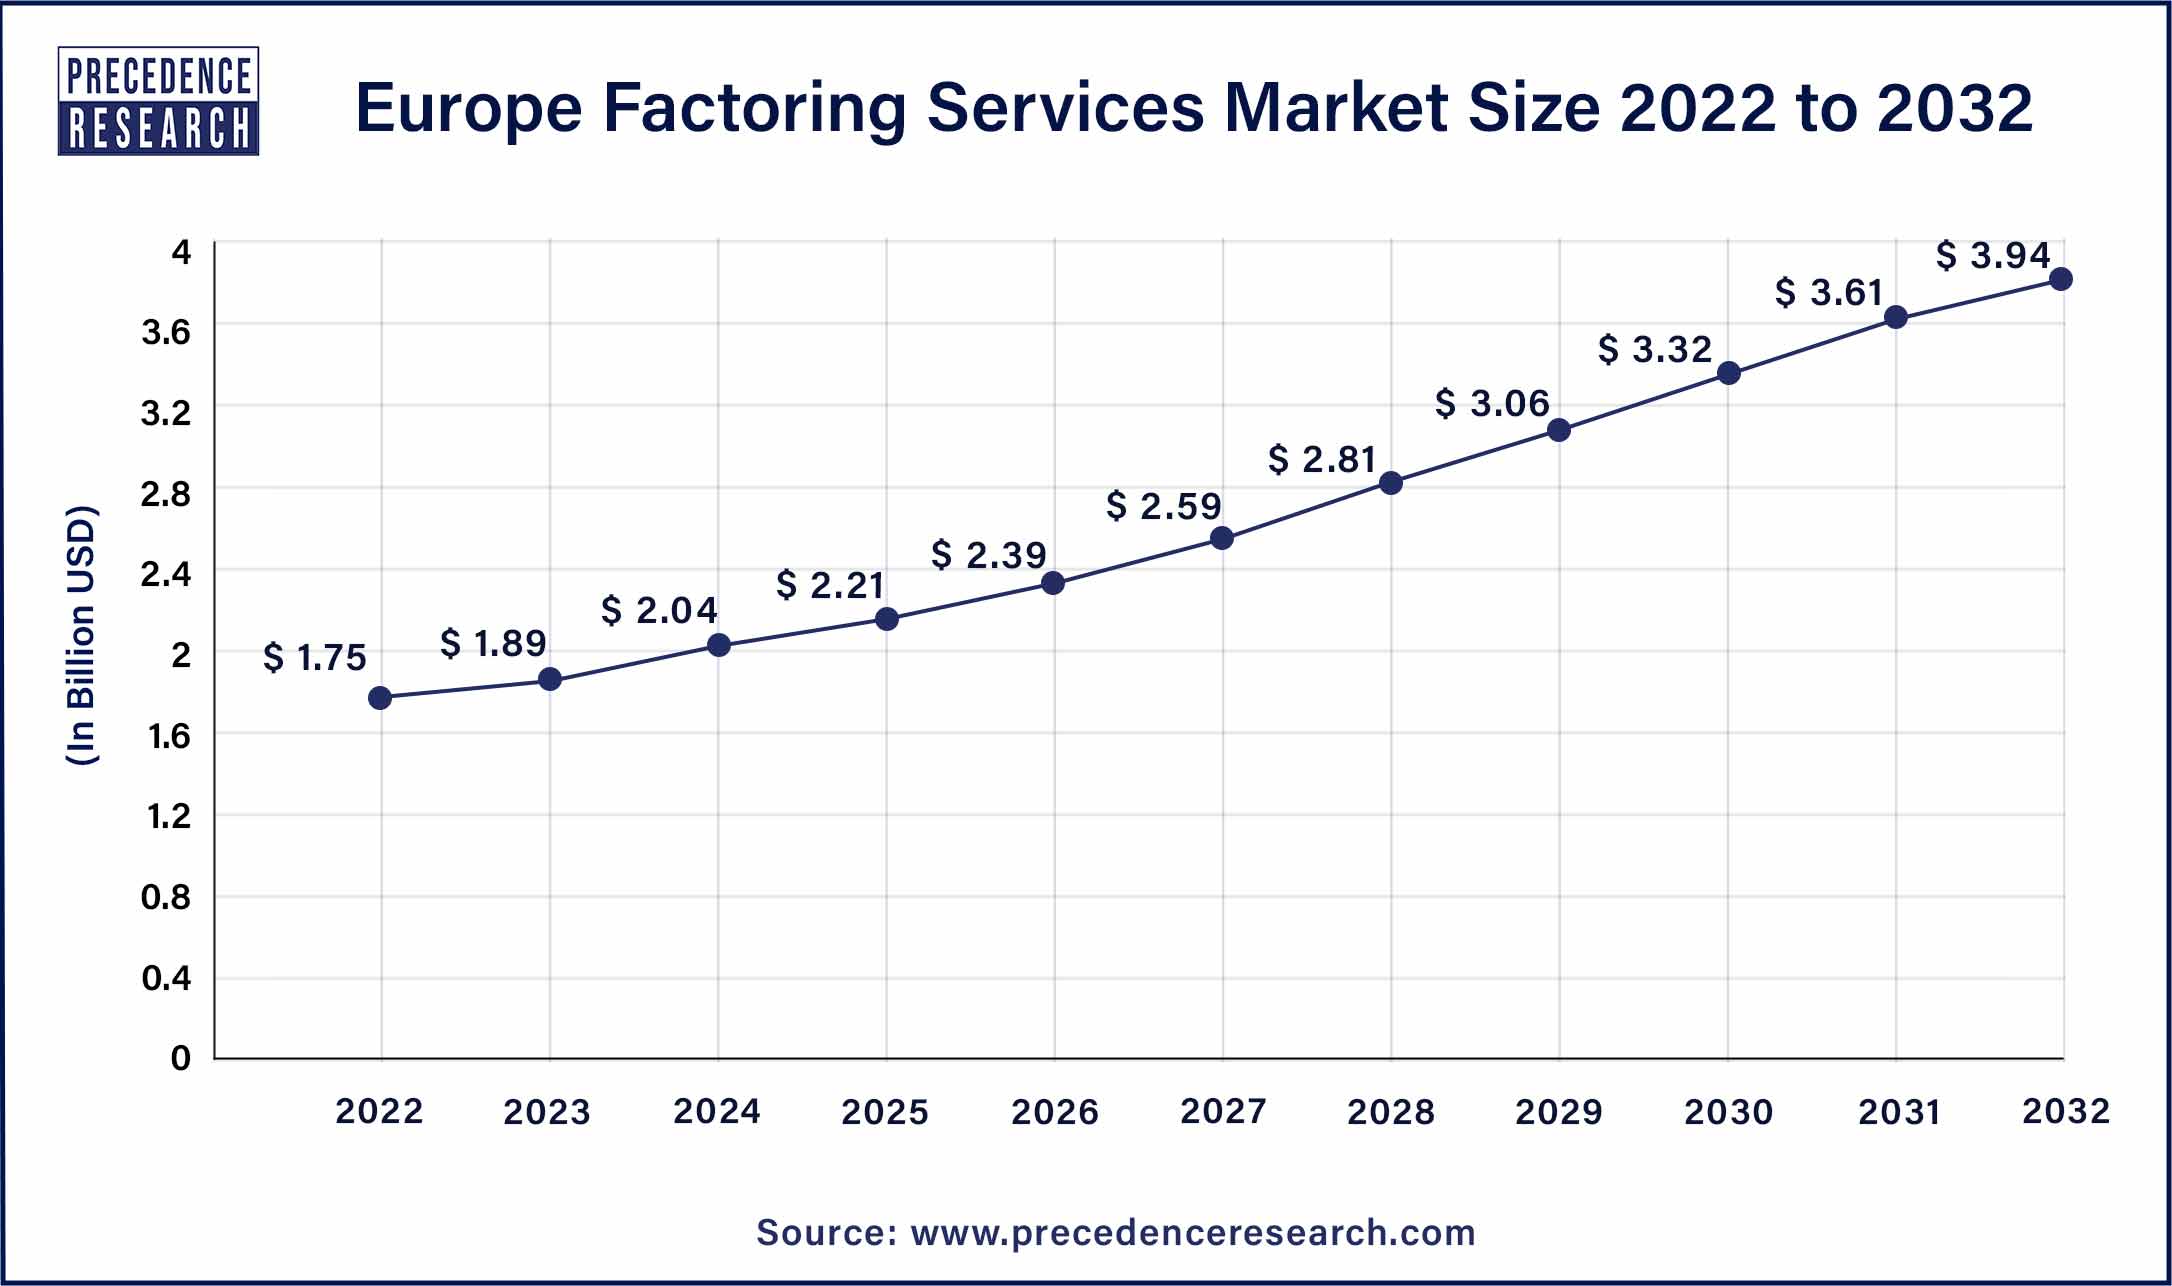 Europe Factoring Services Market Size 2023 To 2032